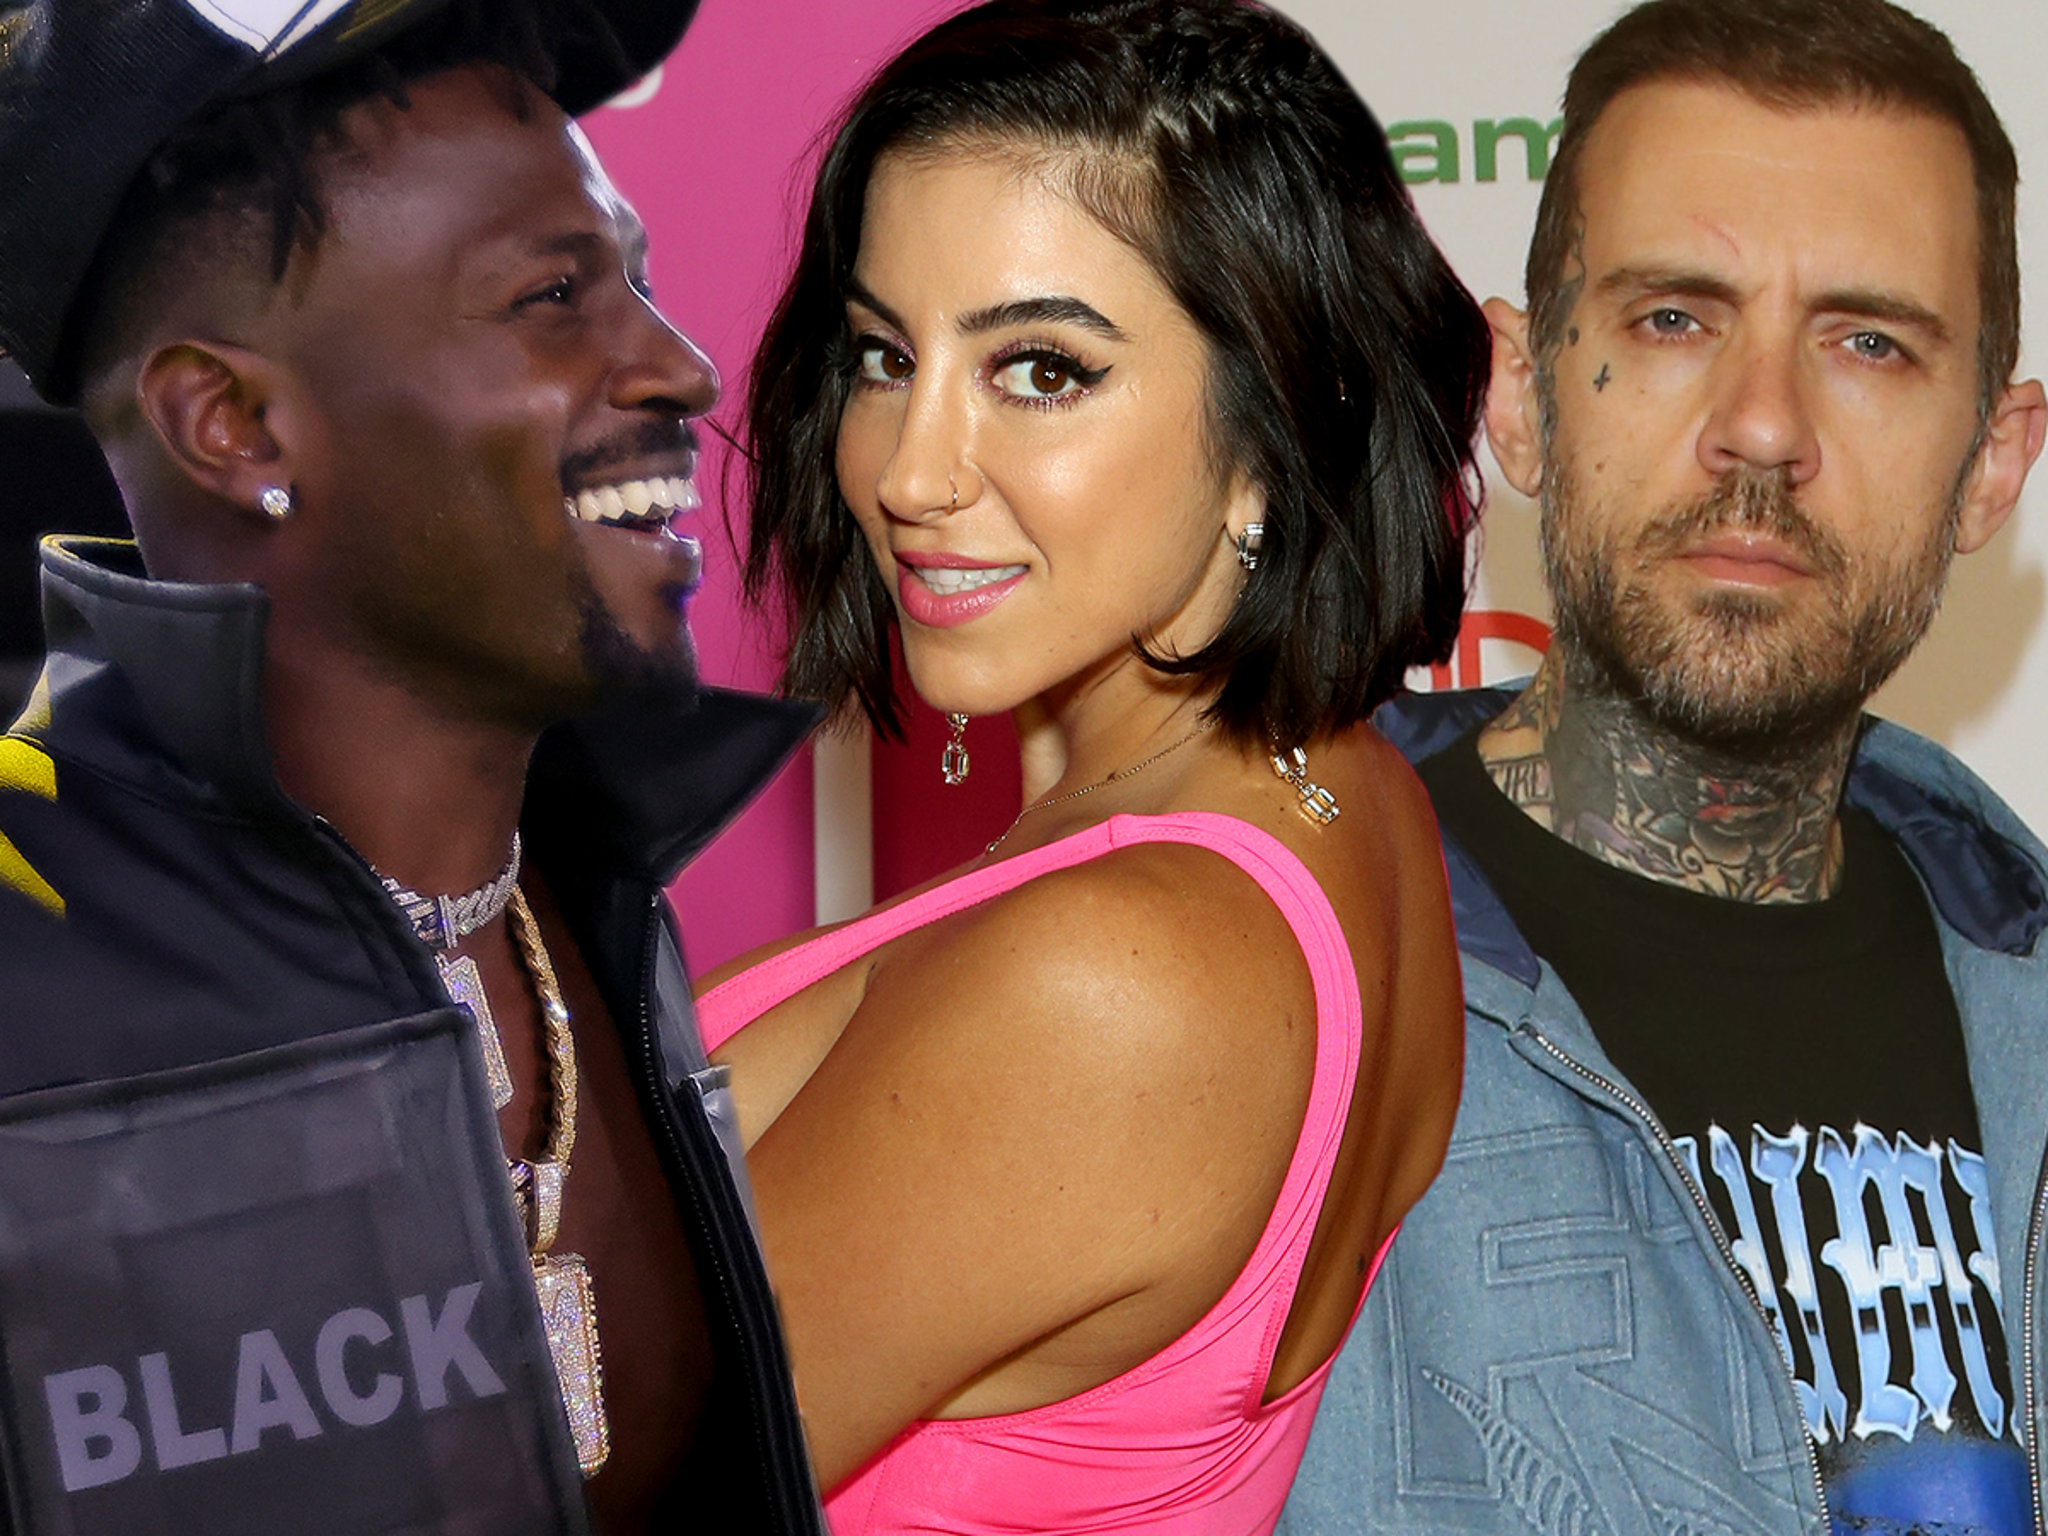 Antonio Brown Wants To Have Sex With Lena The Plug, Lemme Get Next Adam22